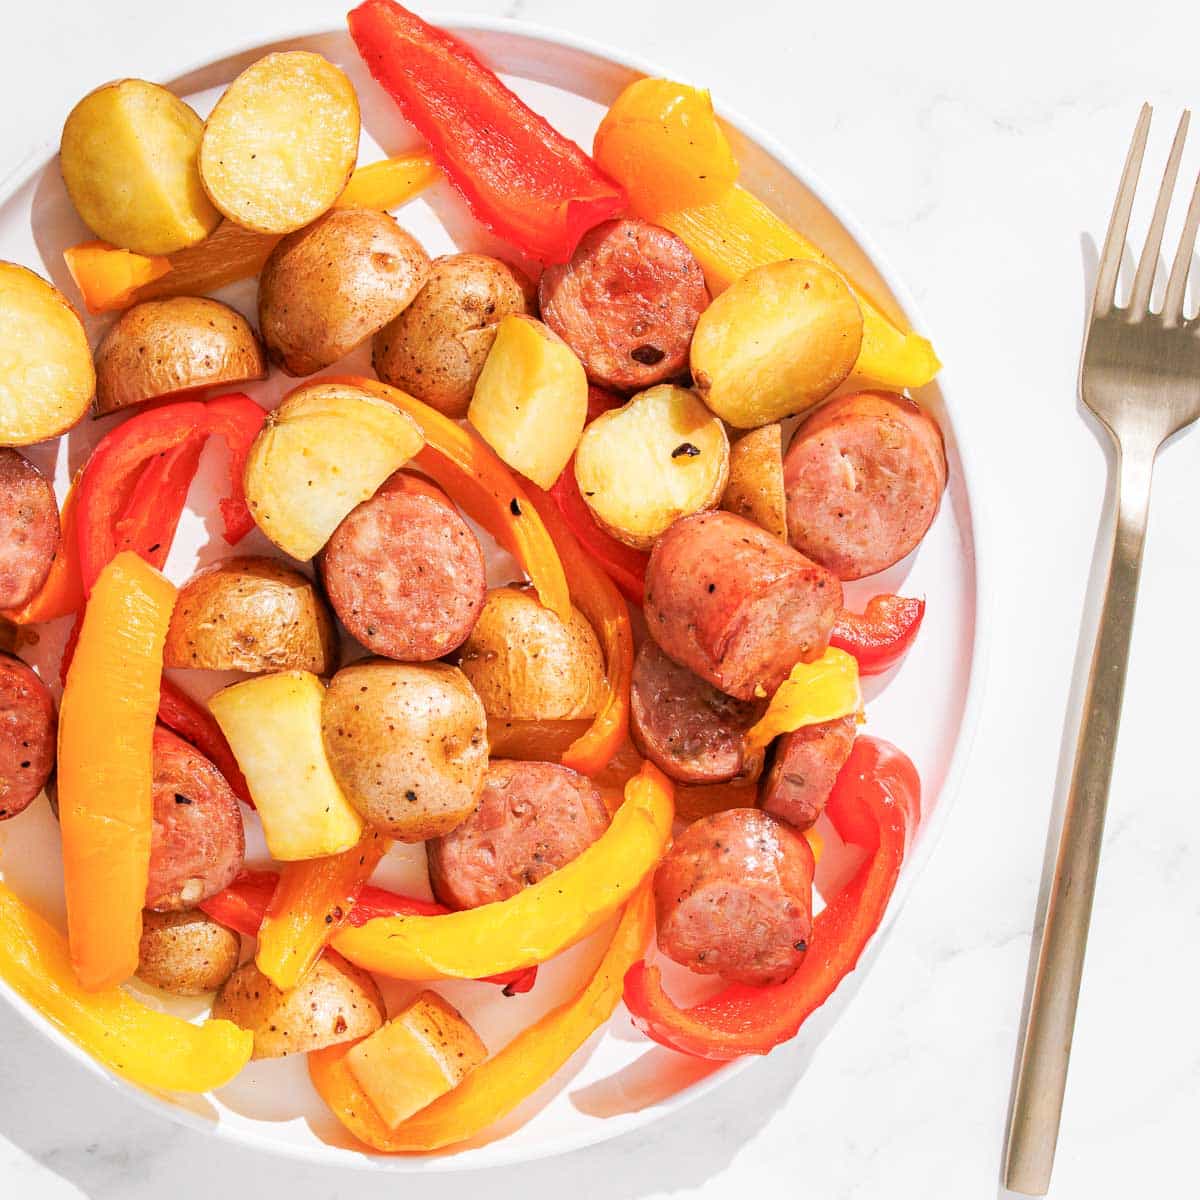 A plate with chicken sausage, potatoes and bell peppers on it.